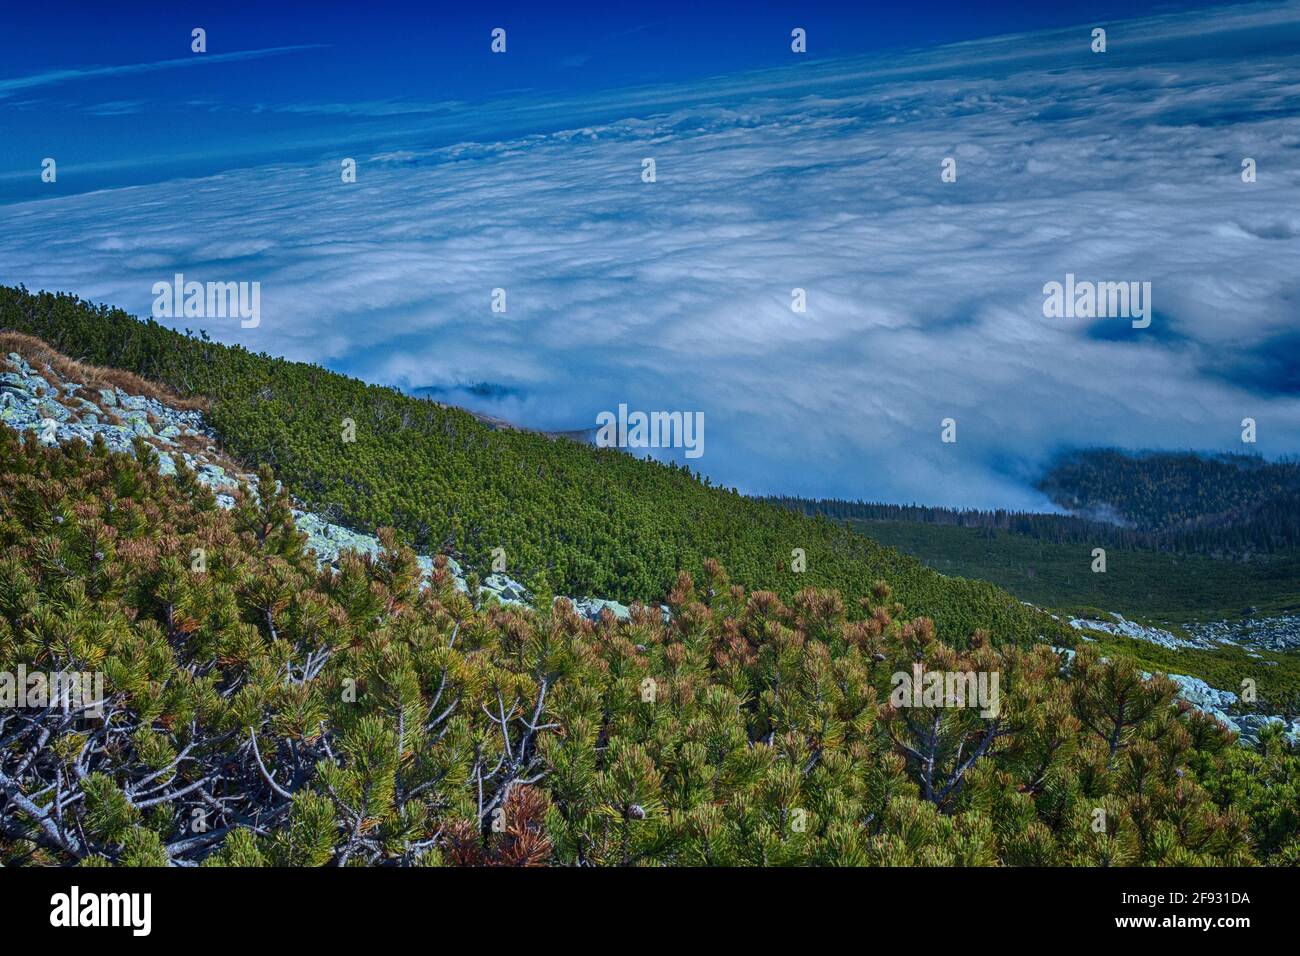 Summer landscape in mountains and the dark blue sky with clouds Stock Photo